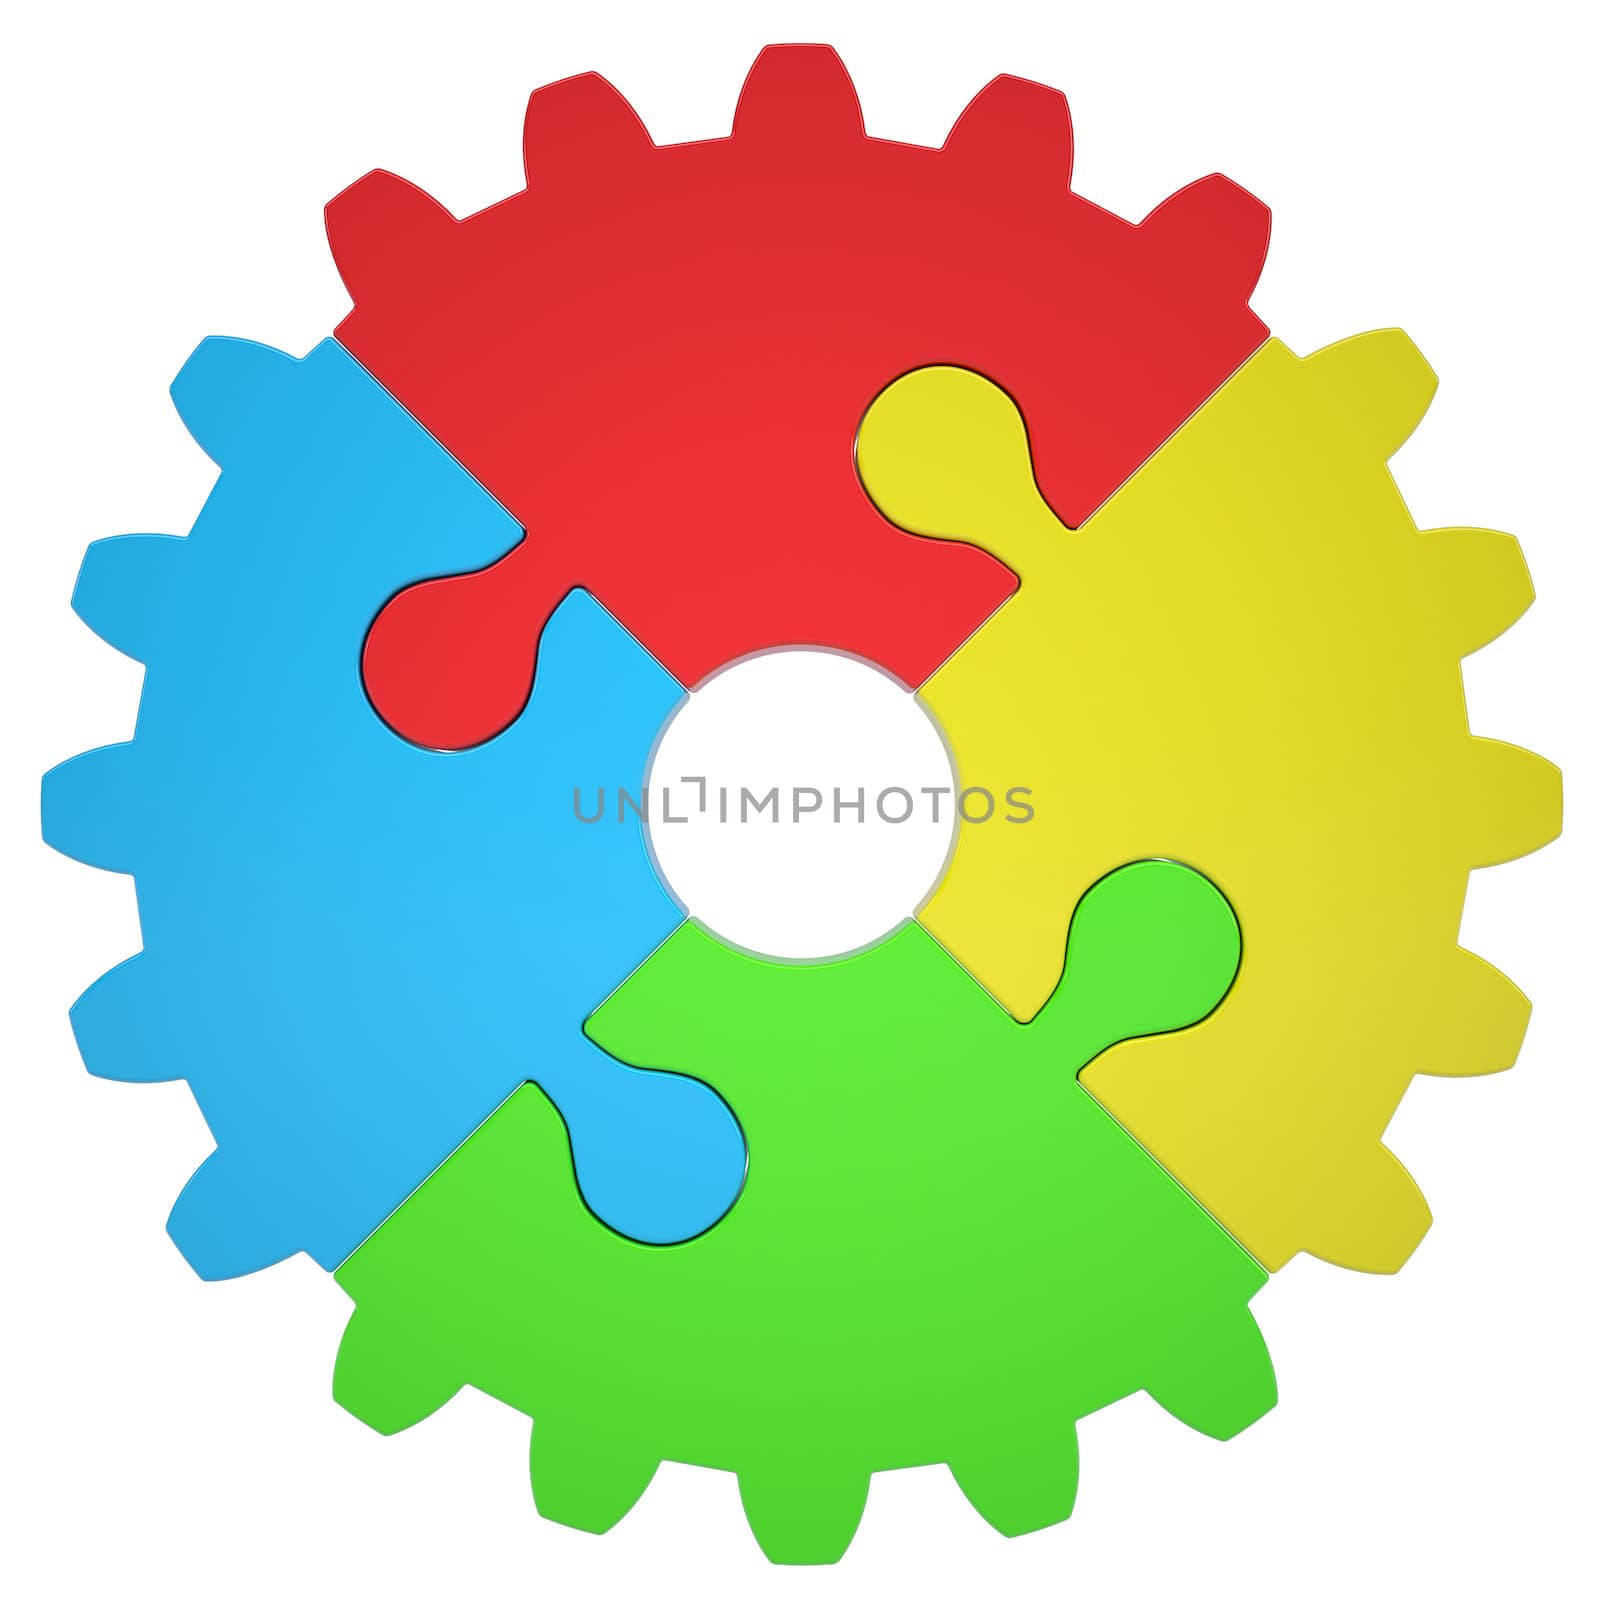 Gear consisting of puzzles by cherezoff